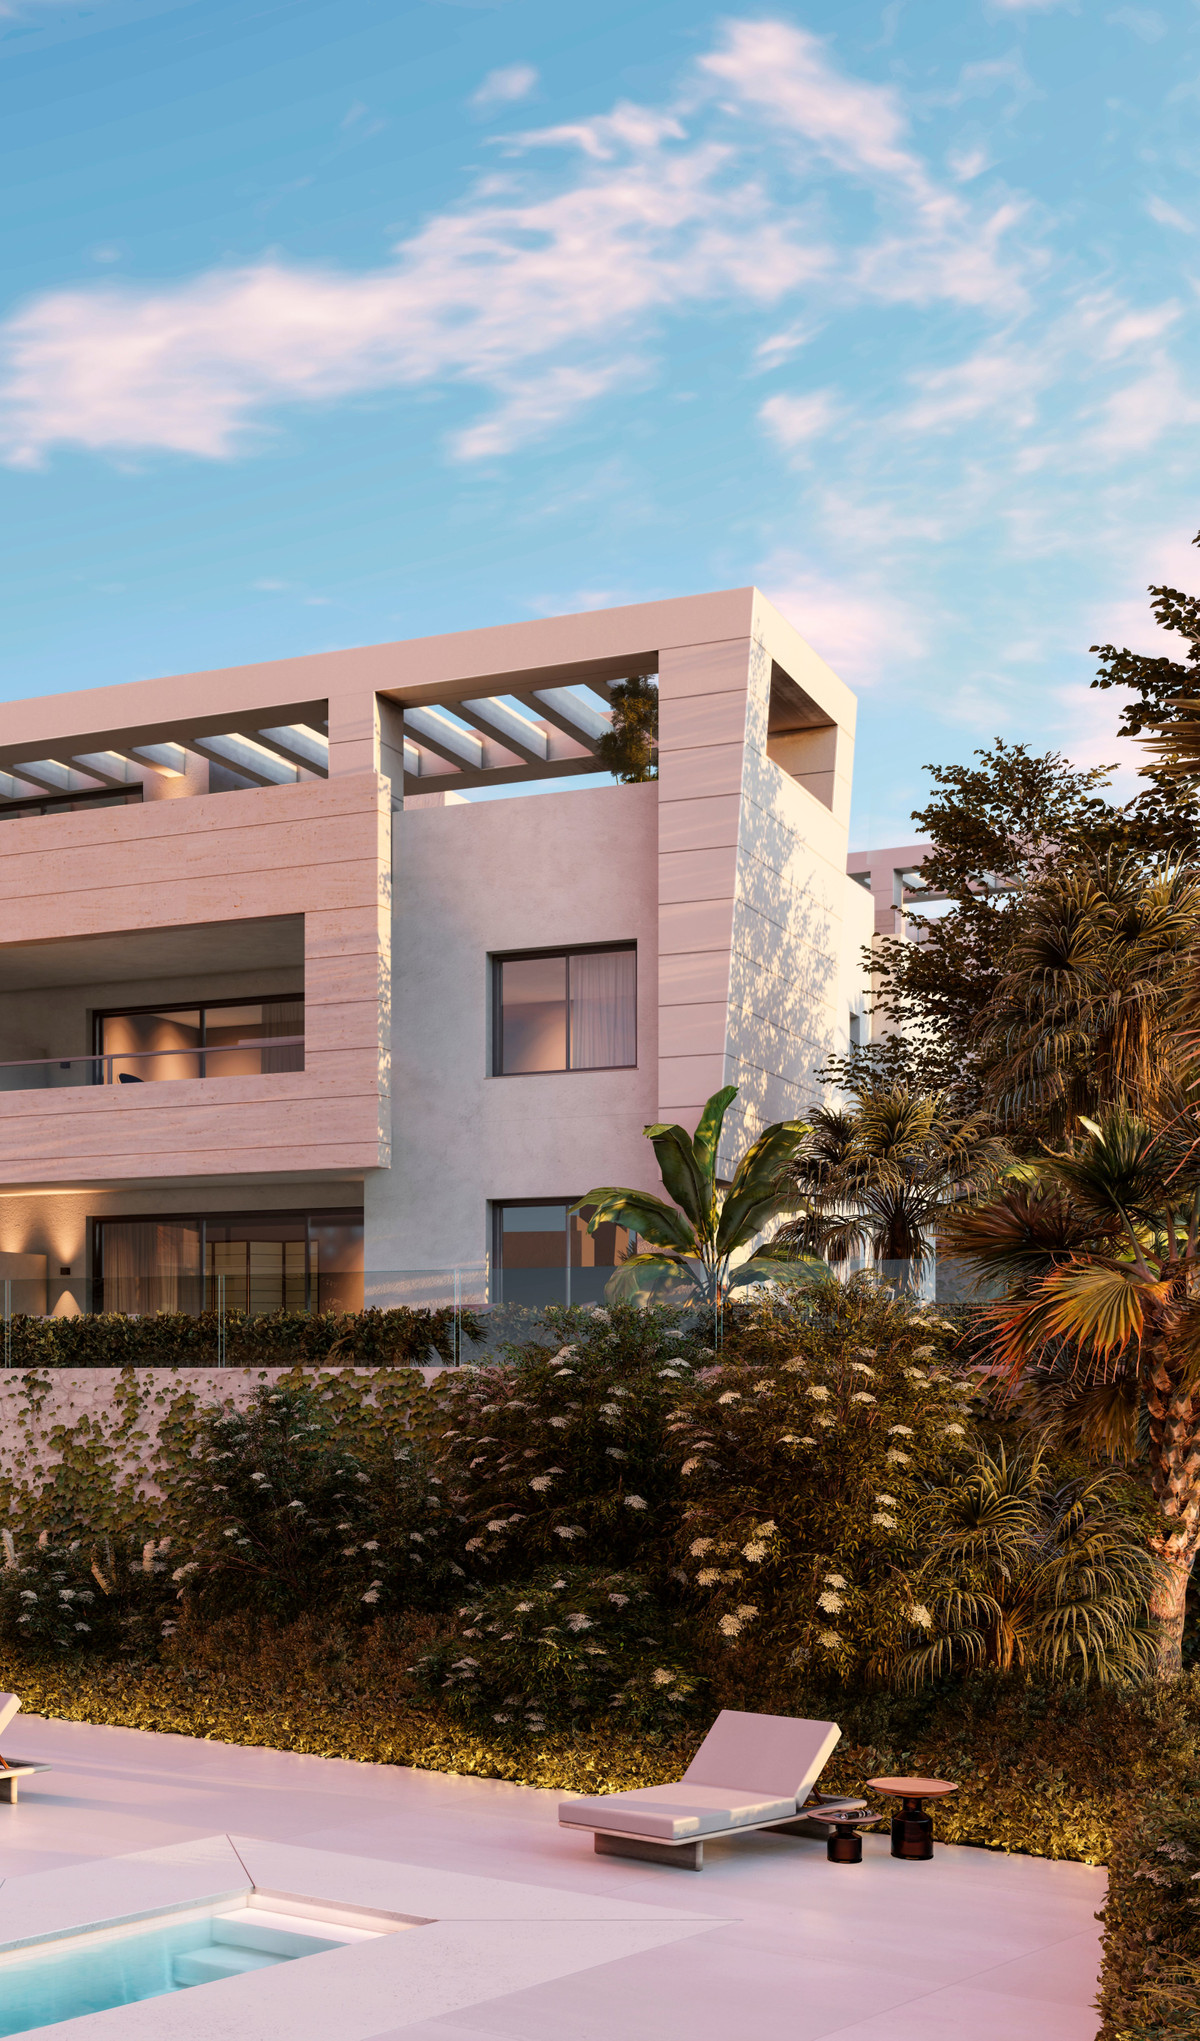 New Development: Prices from € 228,000 to € 238,500. [Beds: 2 - 2] [Baths: 2 - 3] [Built size: 83.00 m2 - 106.00 m2]